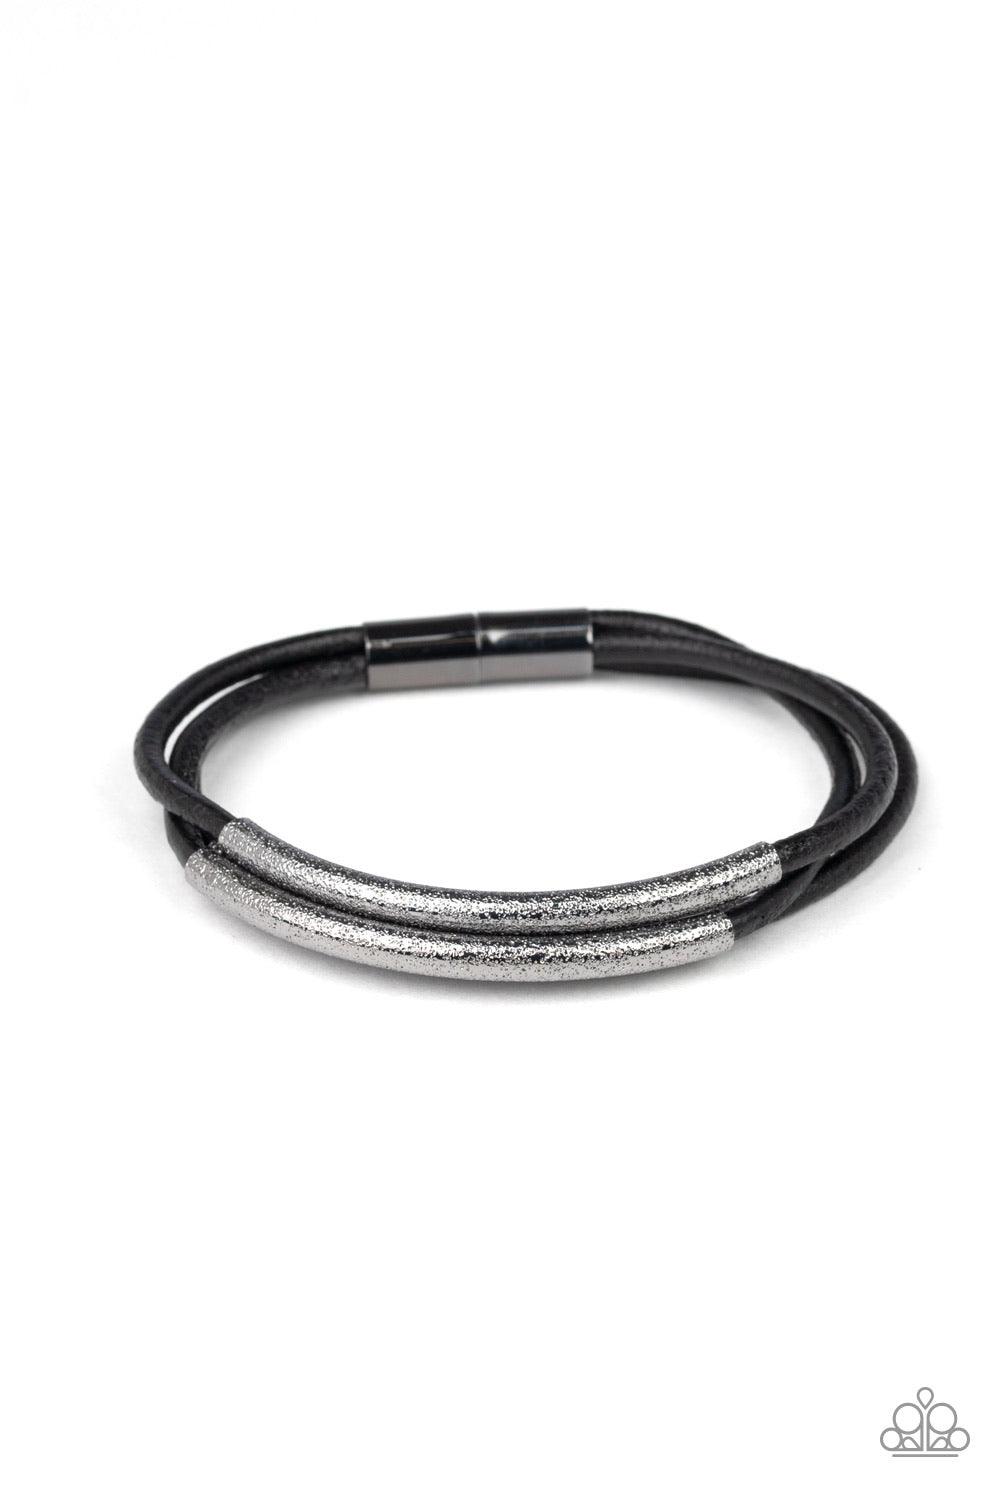 Paparazzi Accessories Magnetic Maverick - Black Hammered gunmetal accents are threaded along layers of black cording, creating an edgy centerpiece. Features a magnetic closure. Jewelry